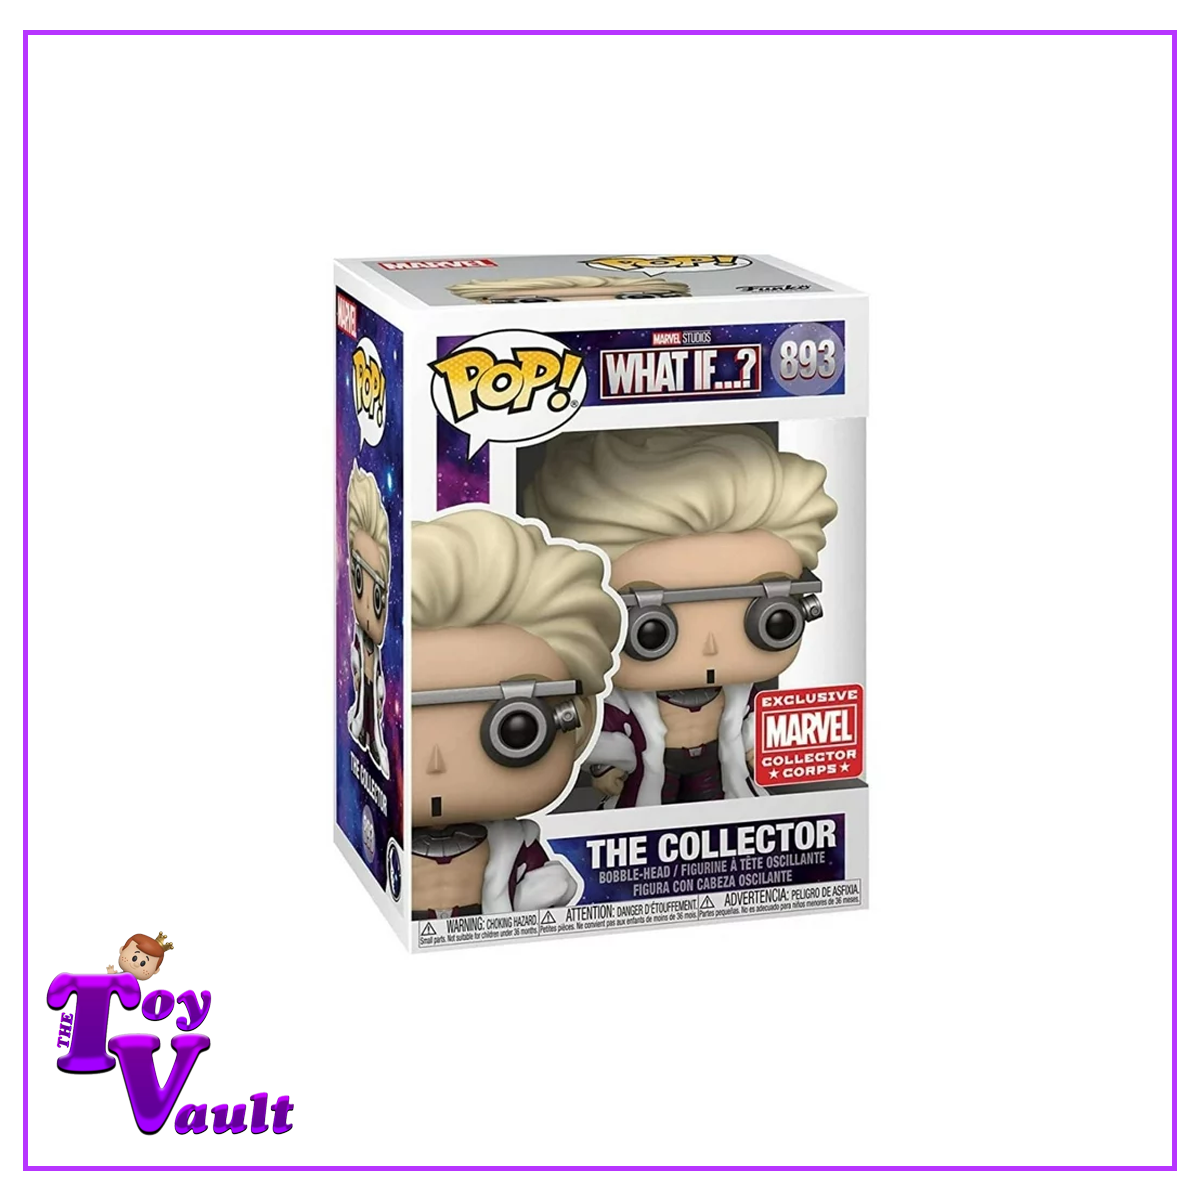 Funko Pop! Marvel What If - The Collector #893 Collector Corps Exclusive